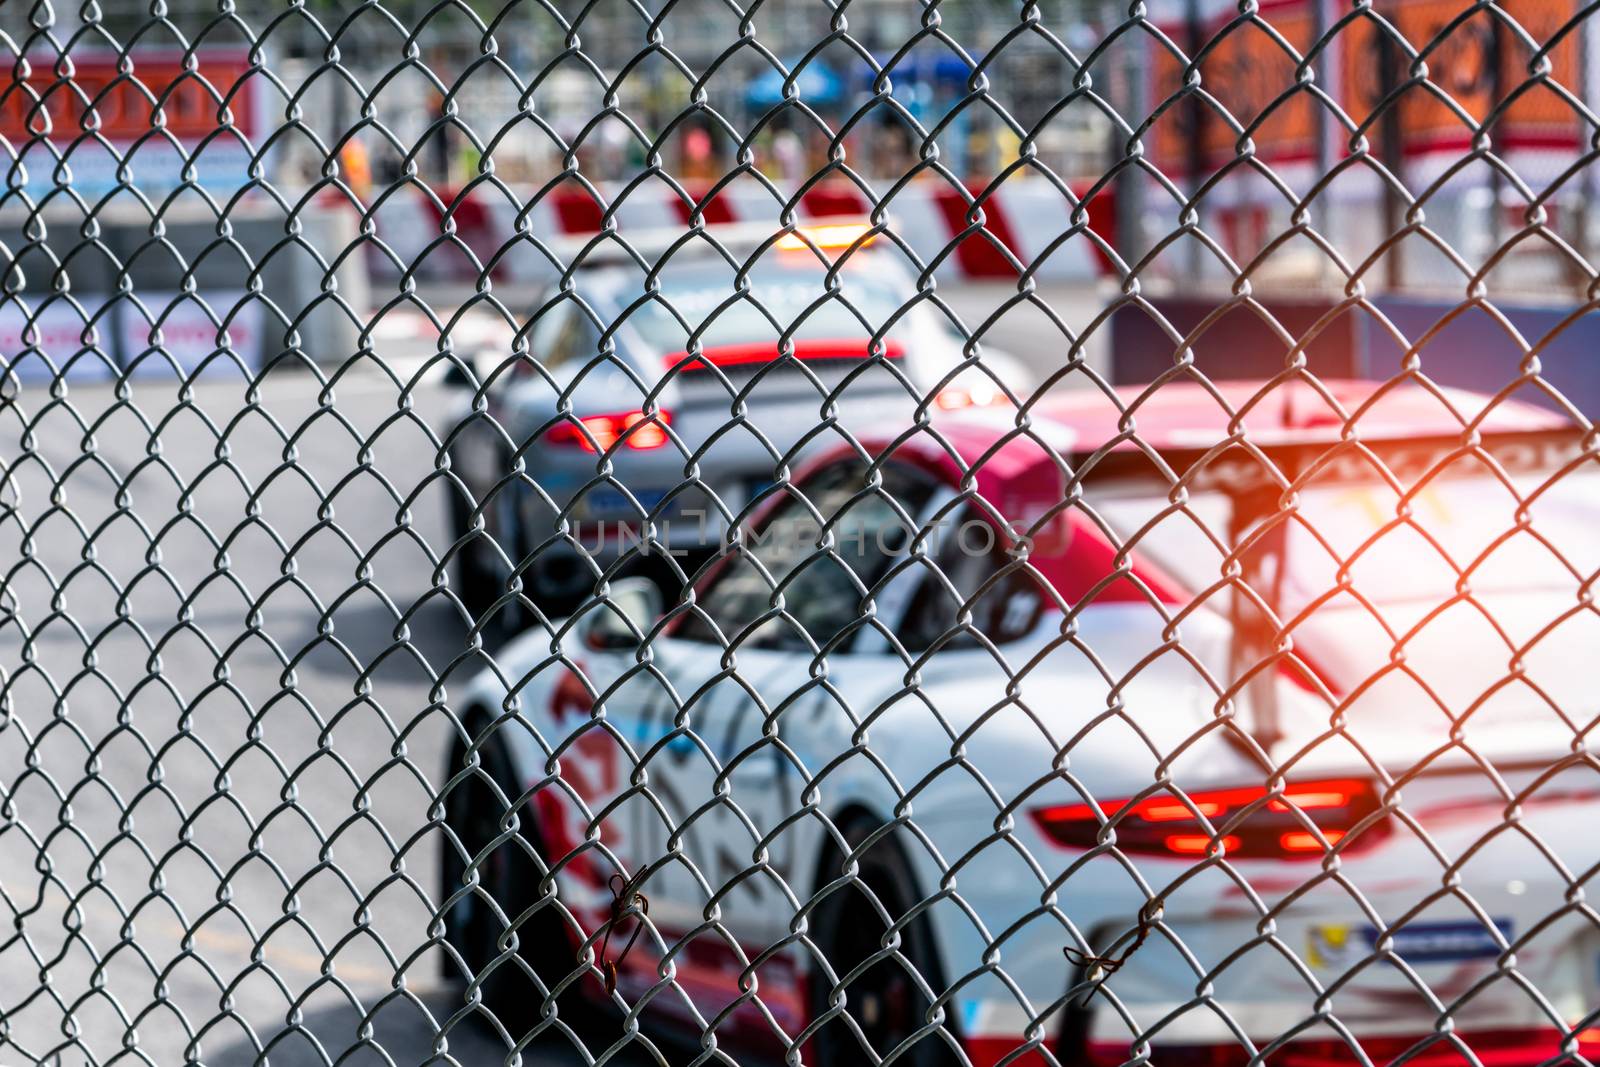 Motorsport car racing on asphalt road. View from the fence mesh netting on blurred car on racetrack background. Super racing car on street circuit. Automotive industry concept. by Fahroni